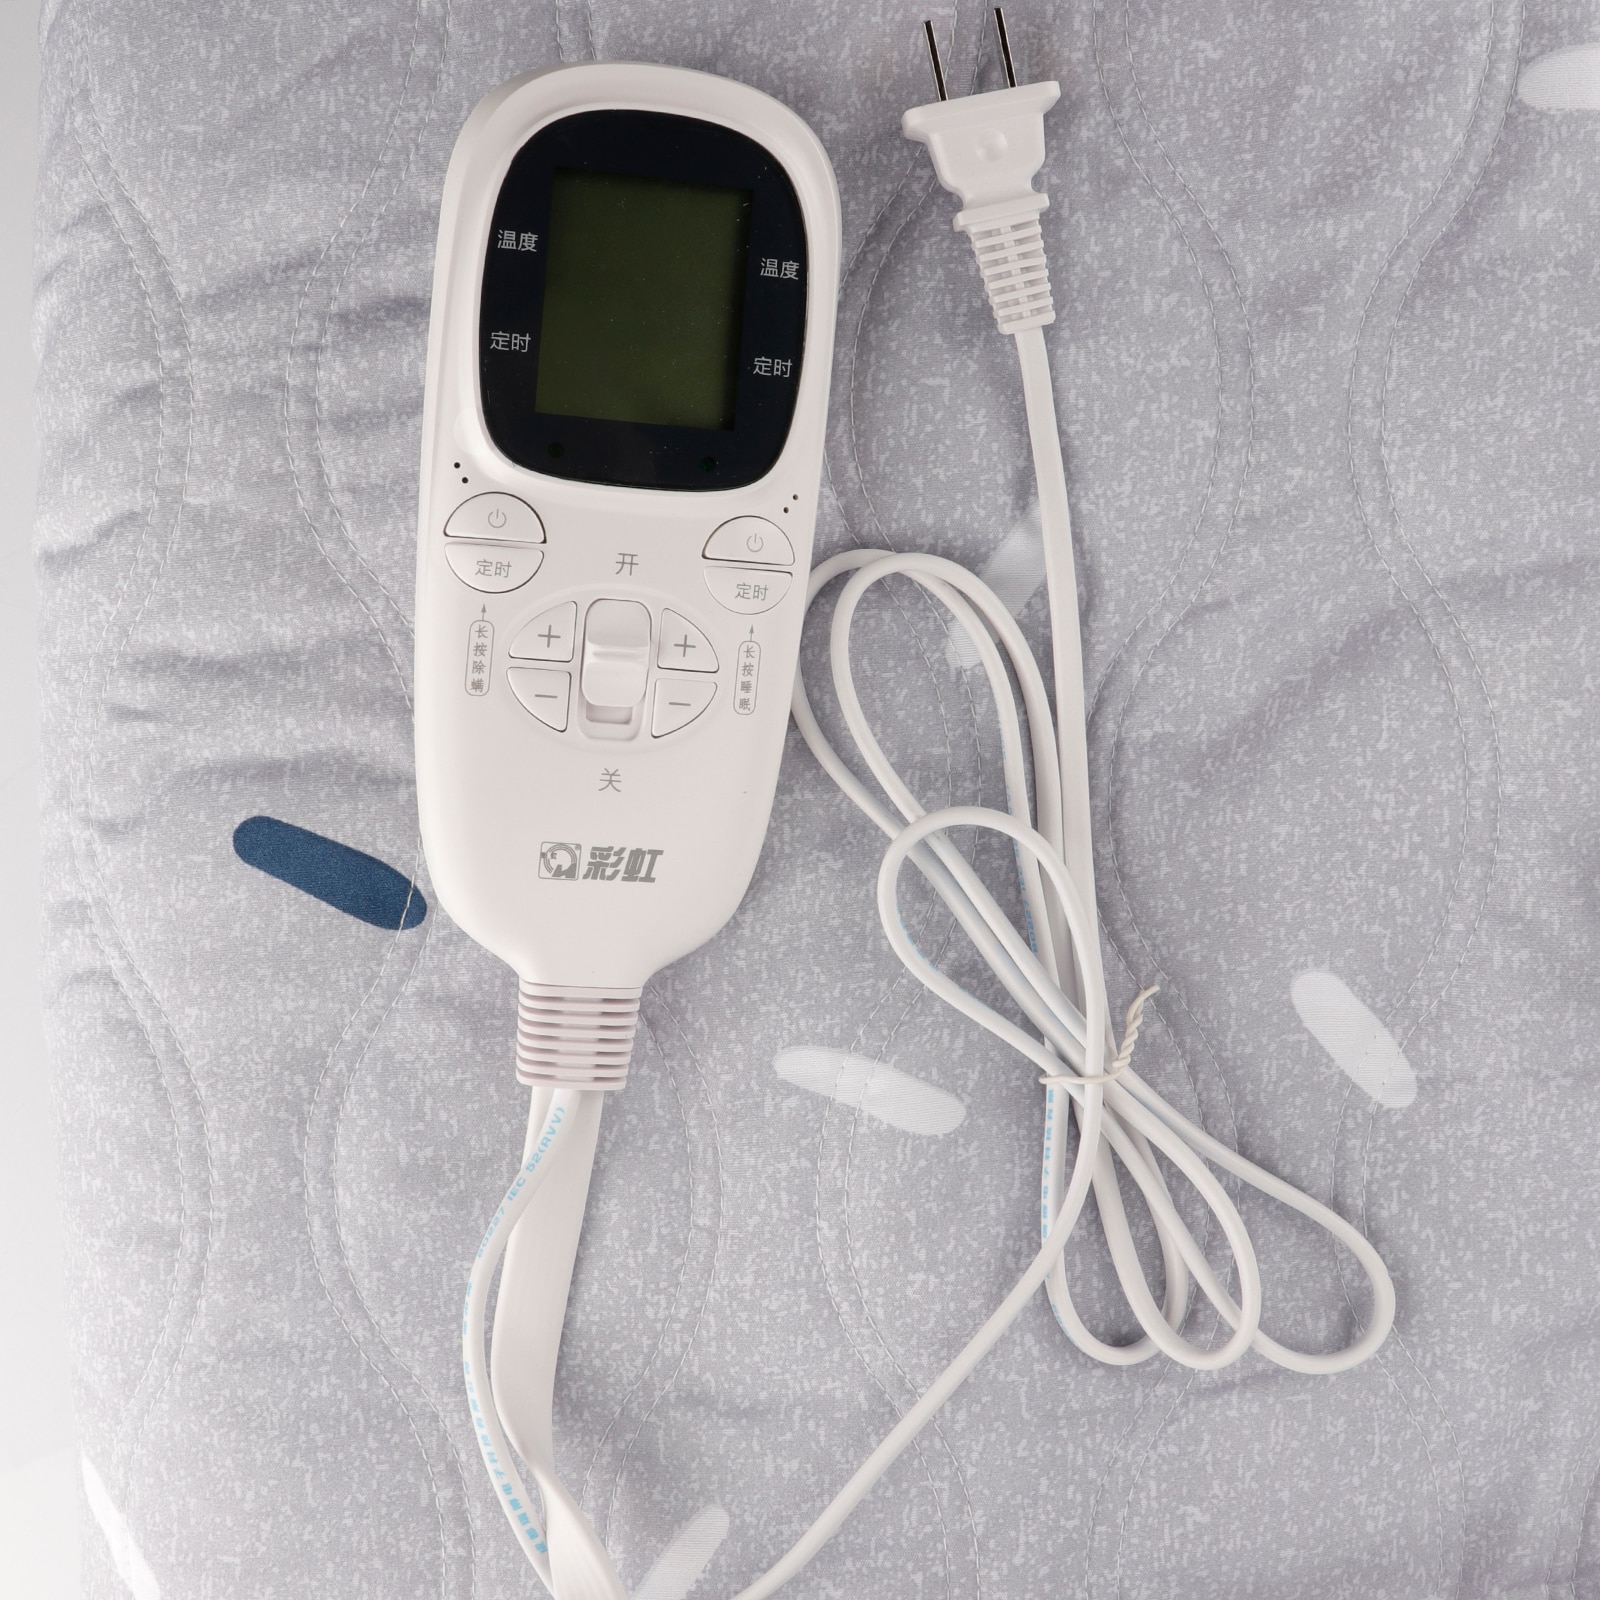 W39E Double Electric Blanket Heated Warmer Timer Body Heater Mattress Winter Bed Warmer Automatic Temperature Control